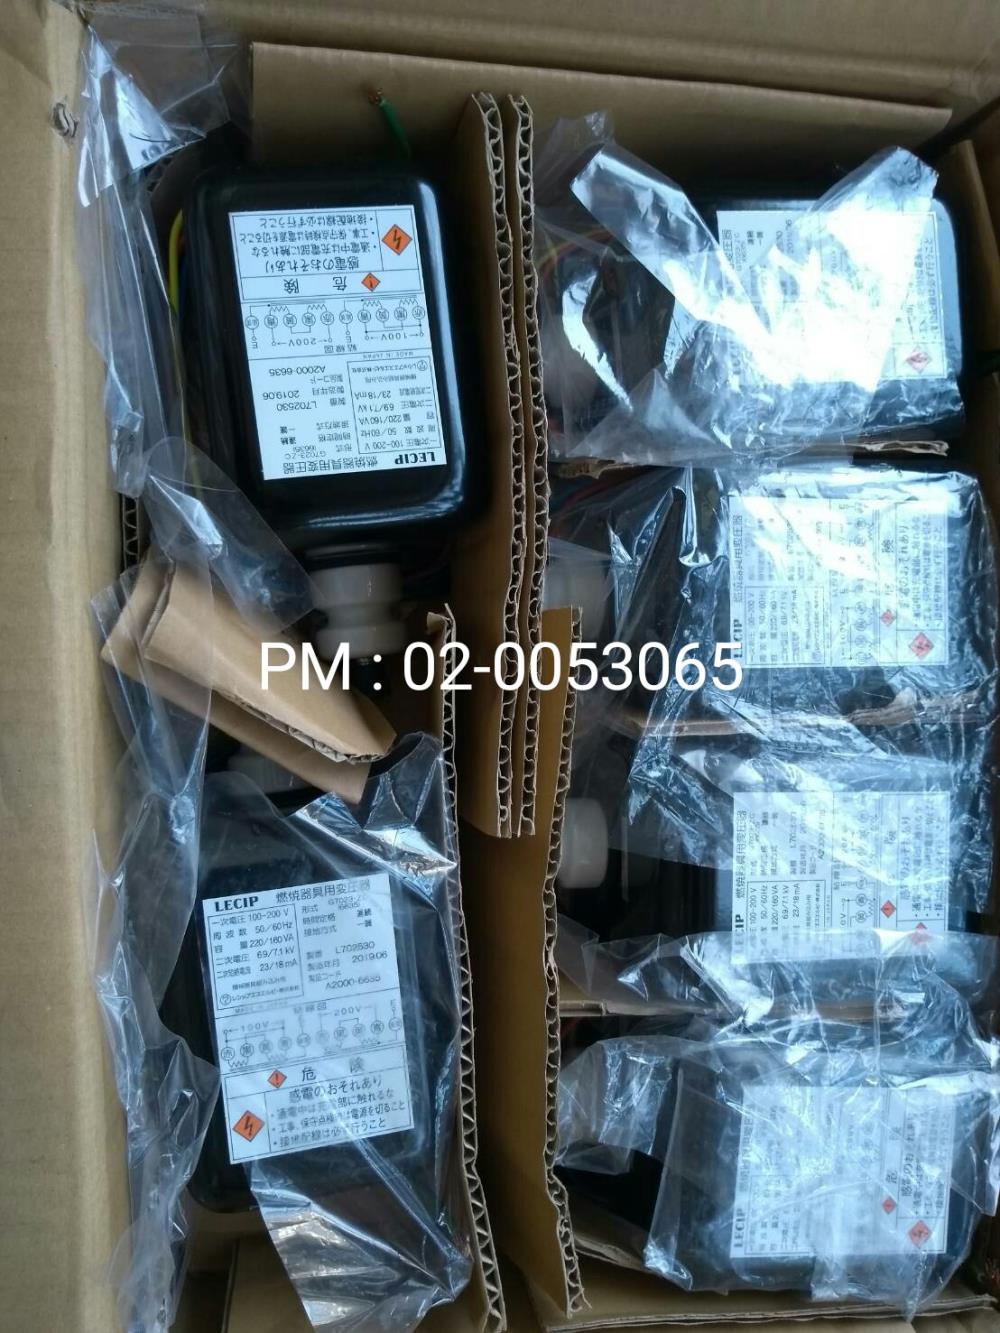 G7023-ZC,g7023-zc,Lecip,Electrical and Power Generation/Transformers